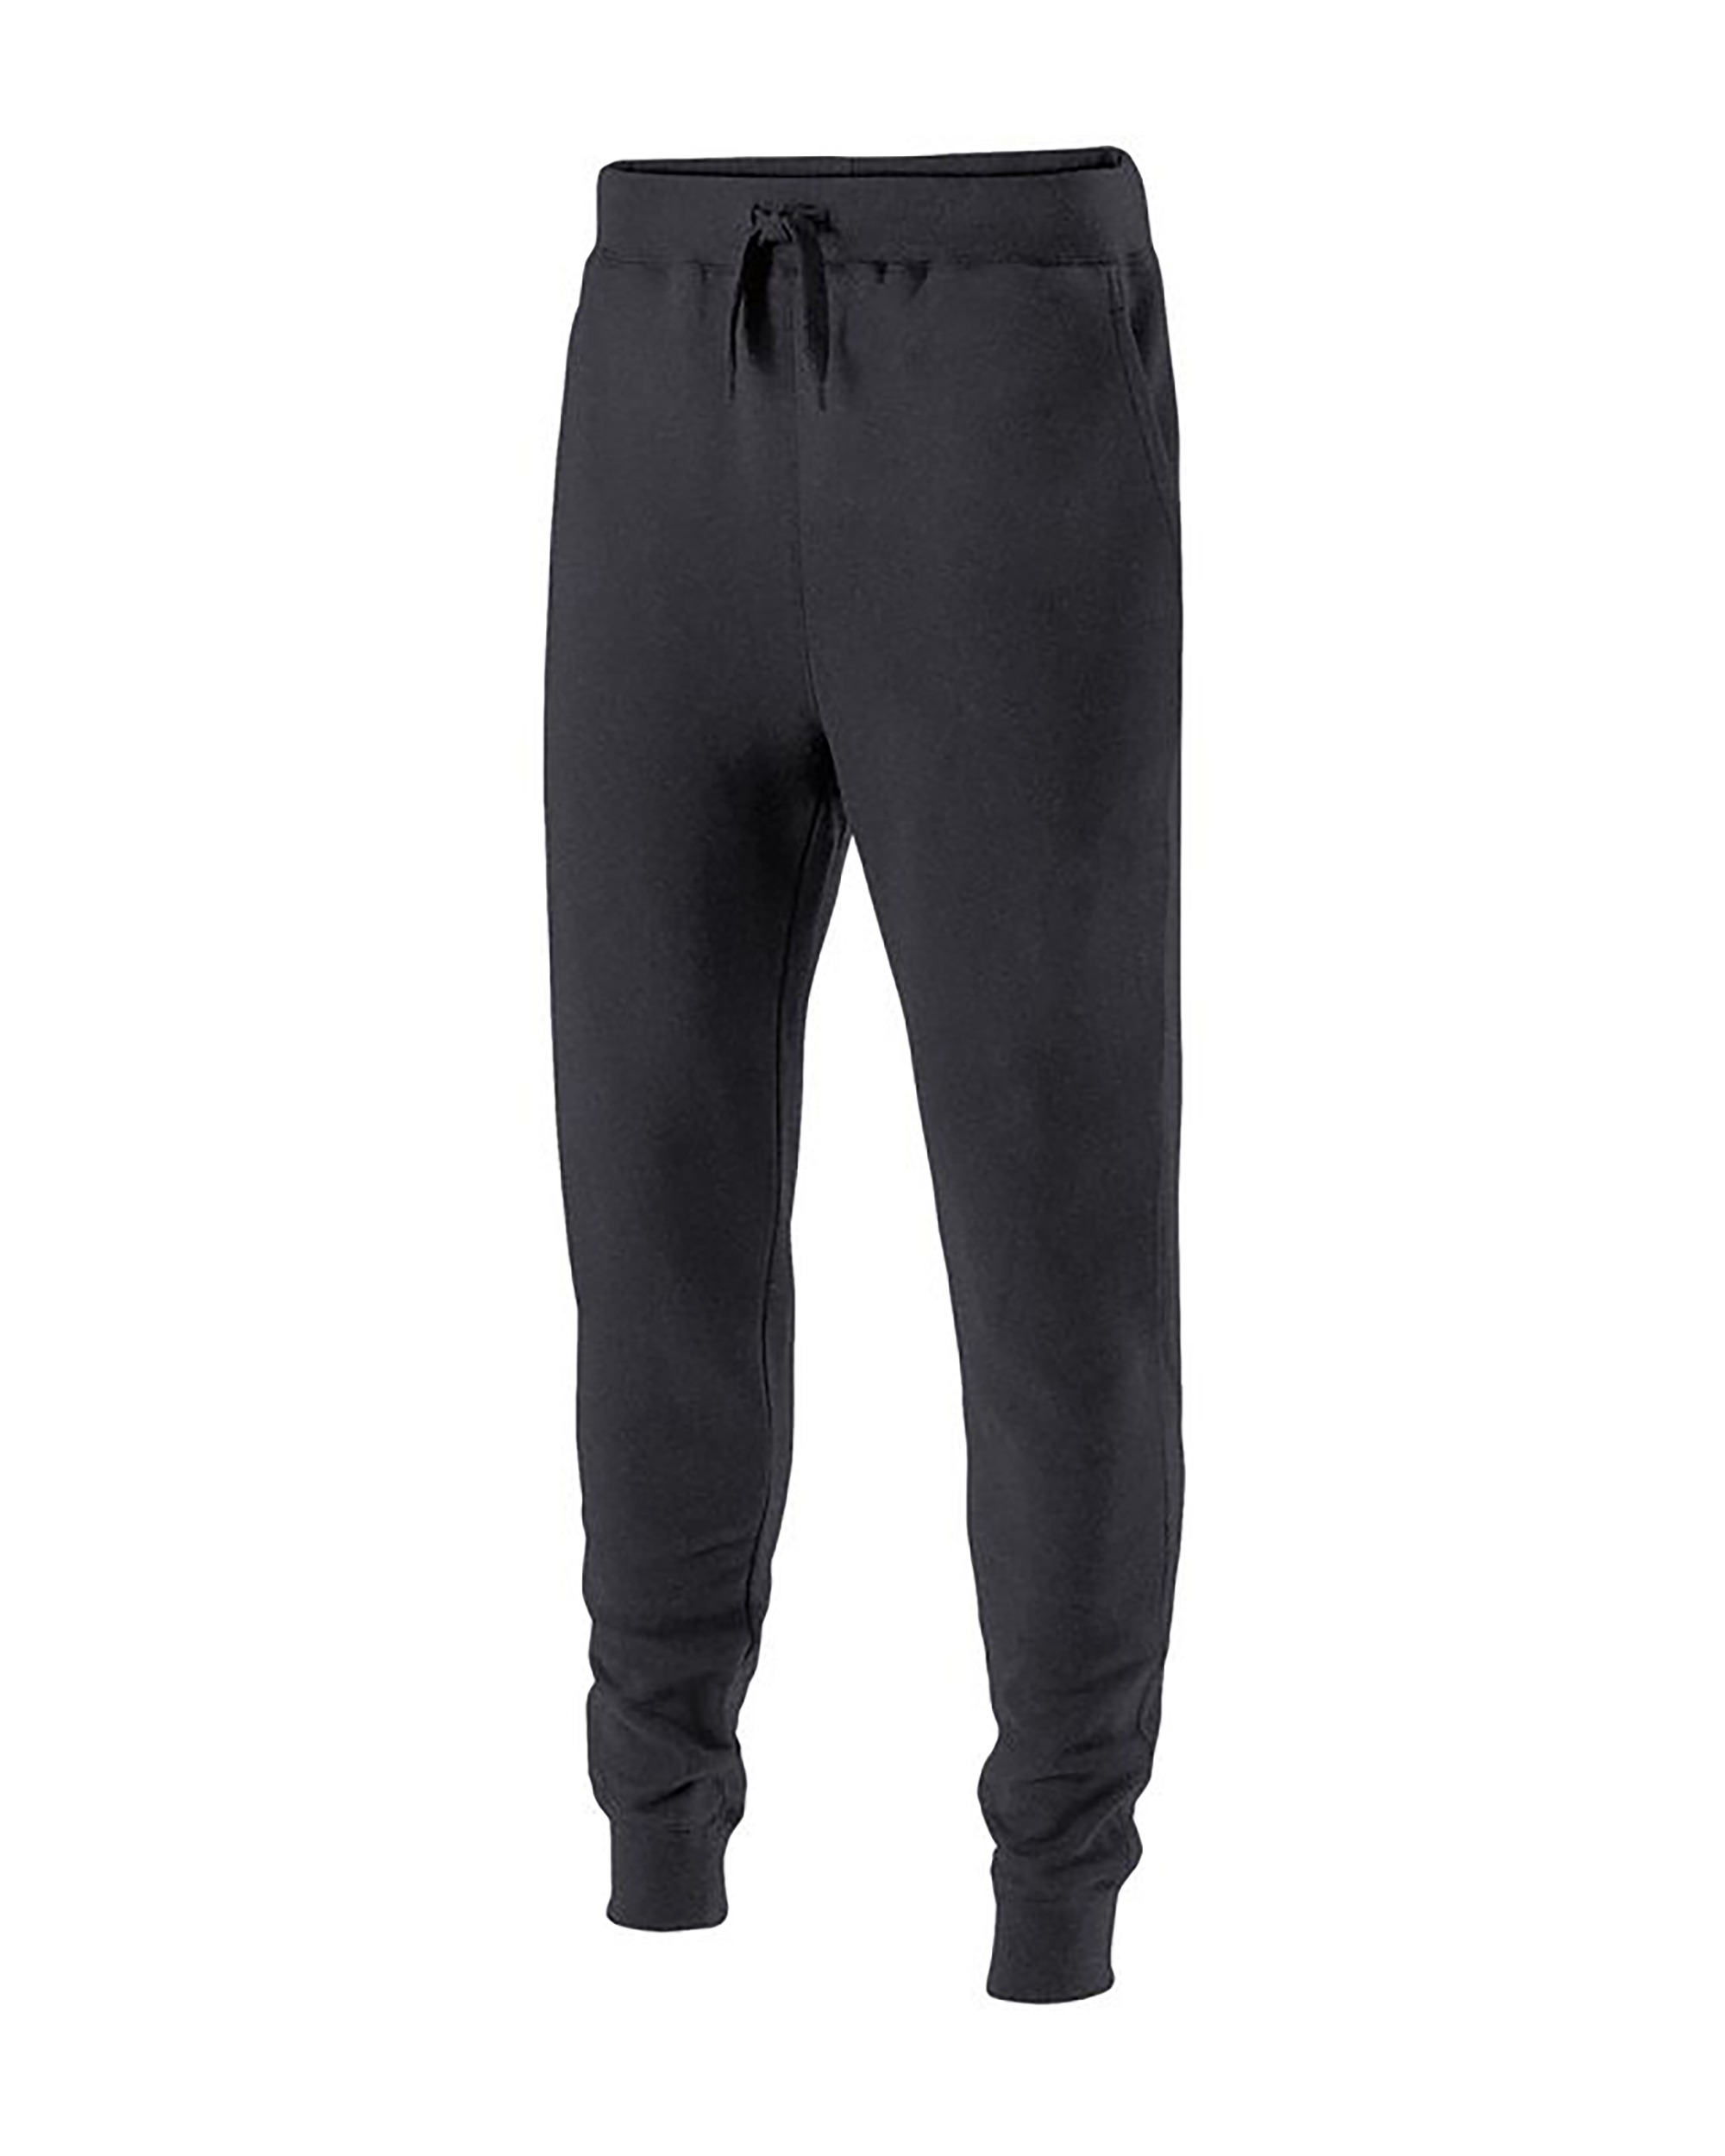 Holloway 229548 60/40 Fleece Jogger, shown in Carbon Heather